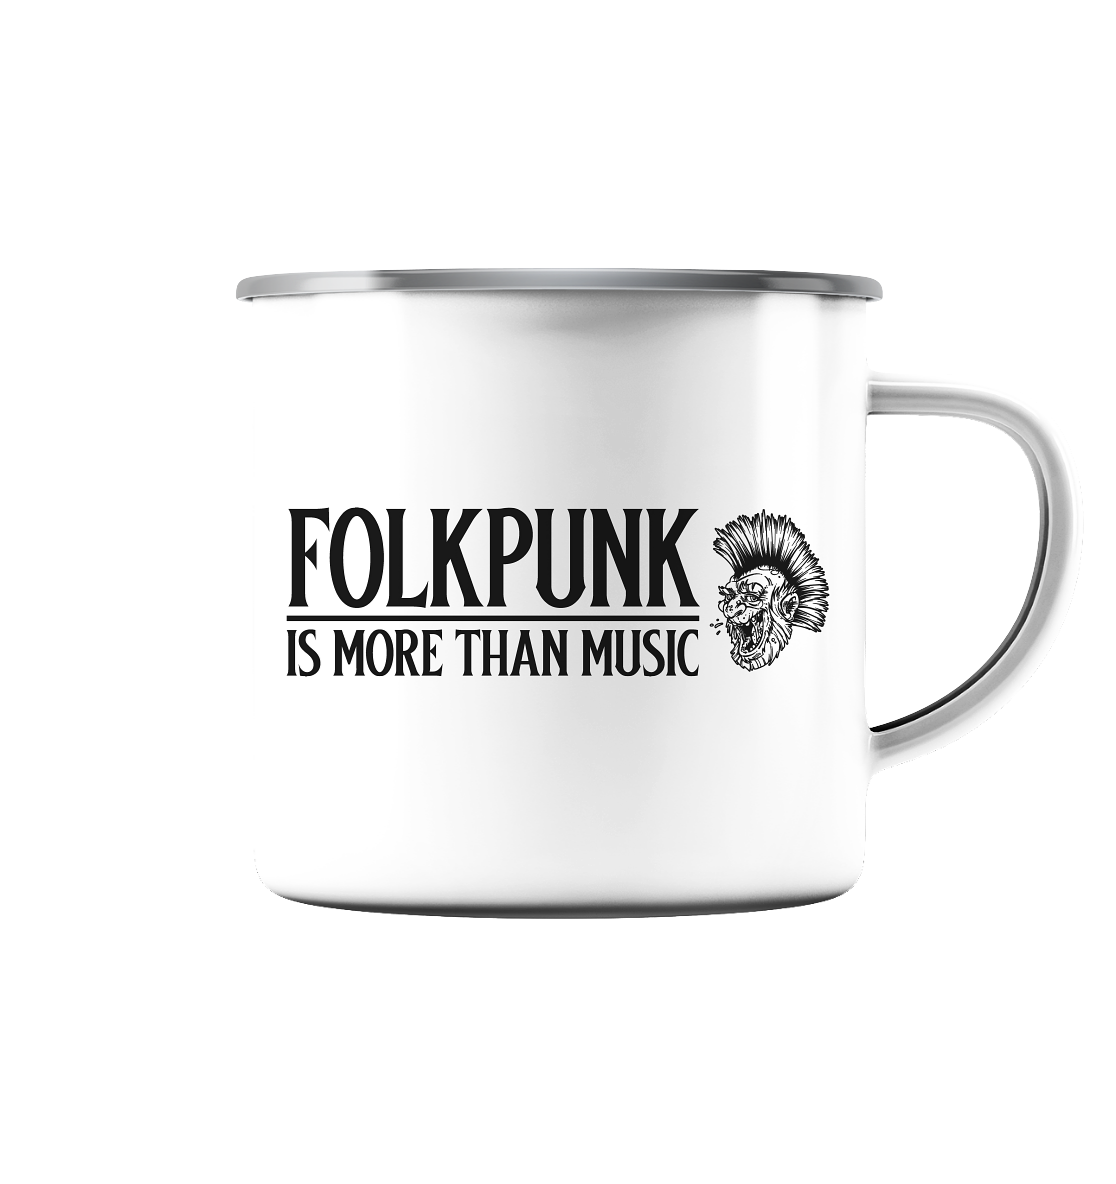 Folkpunk "Is More Than Music" - Emaille Tasse (Silber)